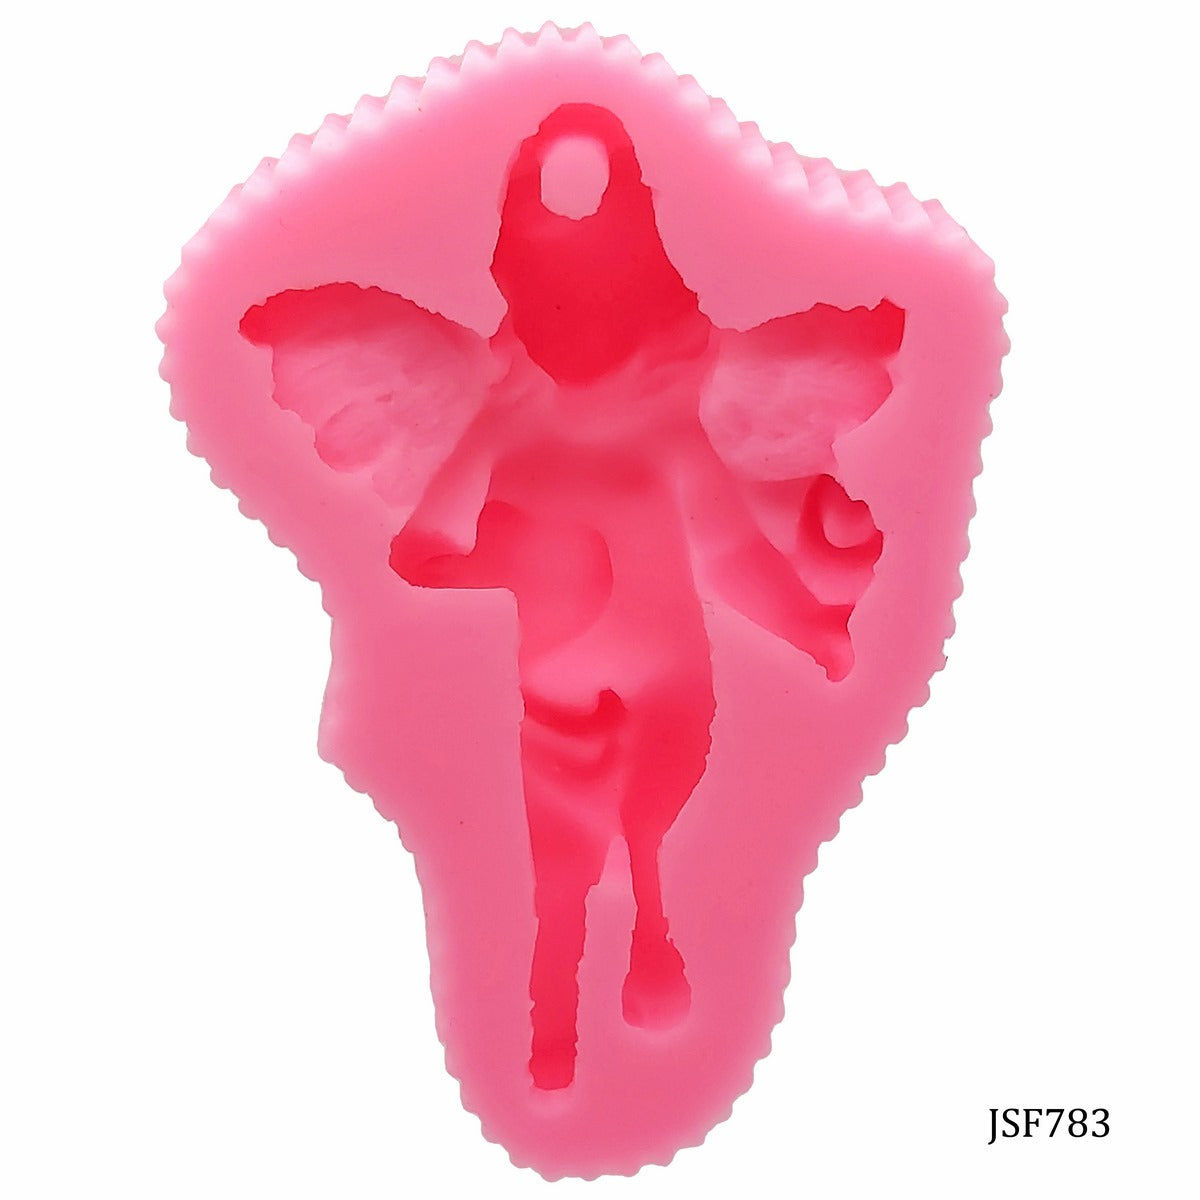 jags-mumbai Mould Silicone Mould Pendant Fairy Angel JSF783